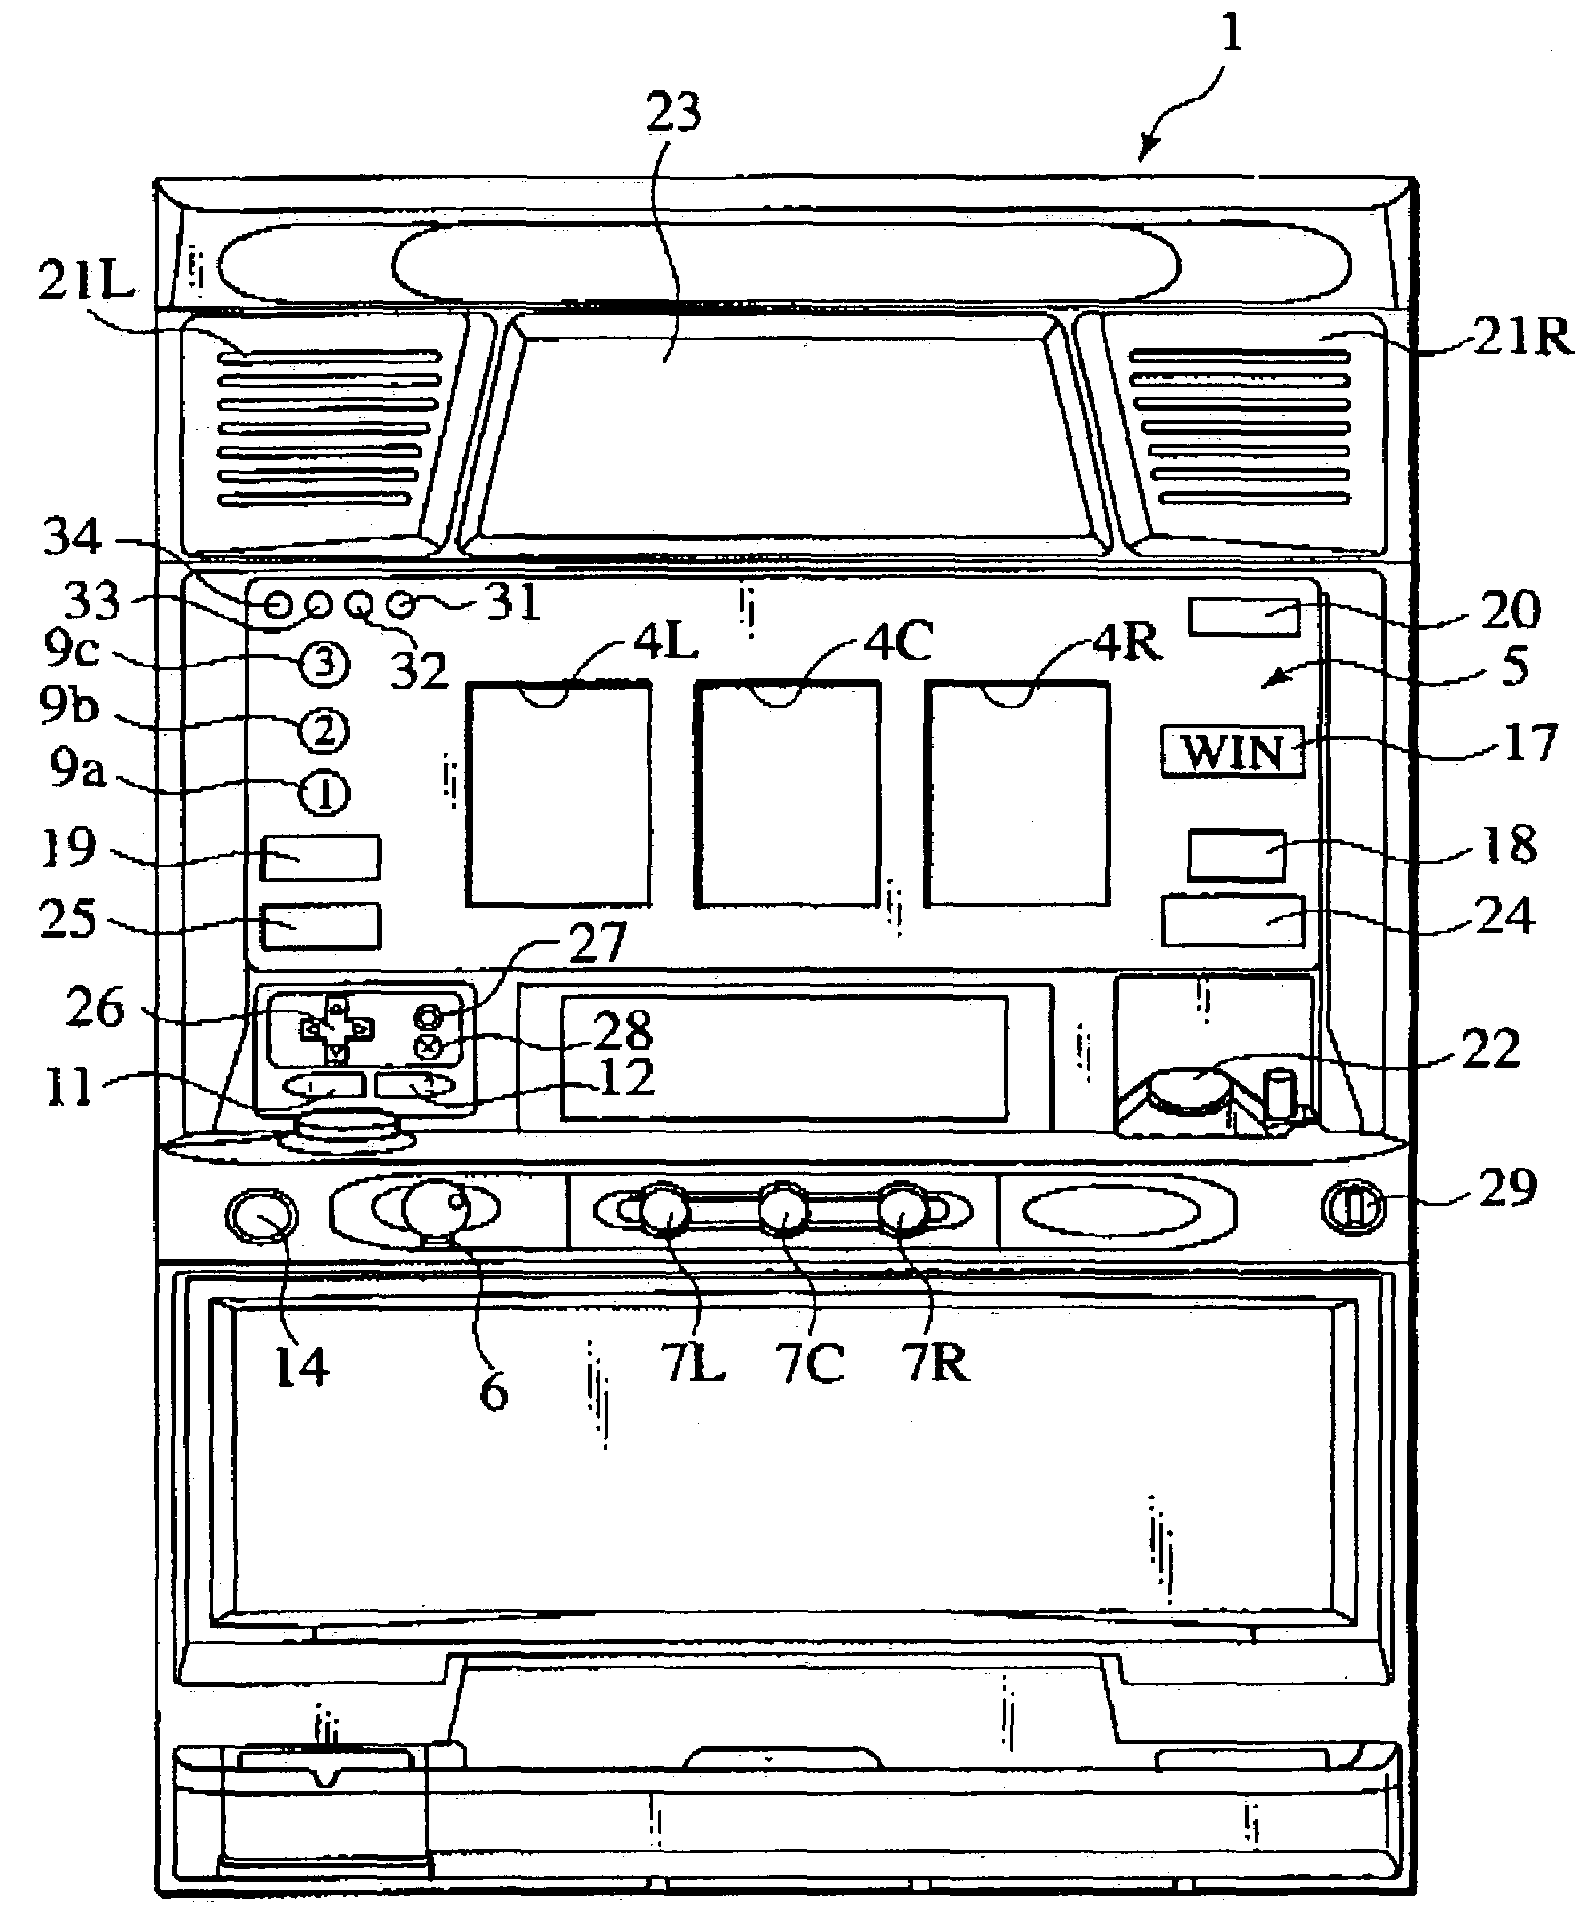 Gaming apparatus with a variable display unit and concealing unit to temporarily conceal the variable display unit